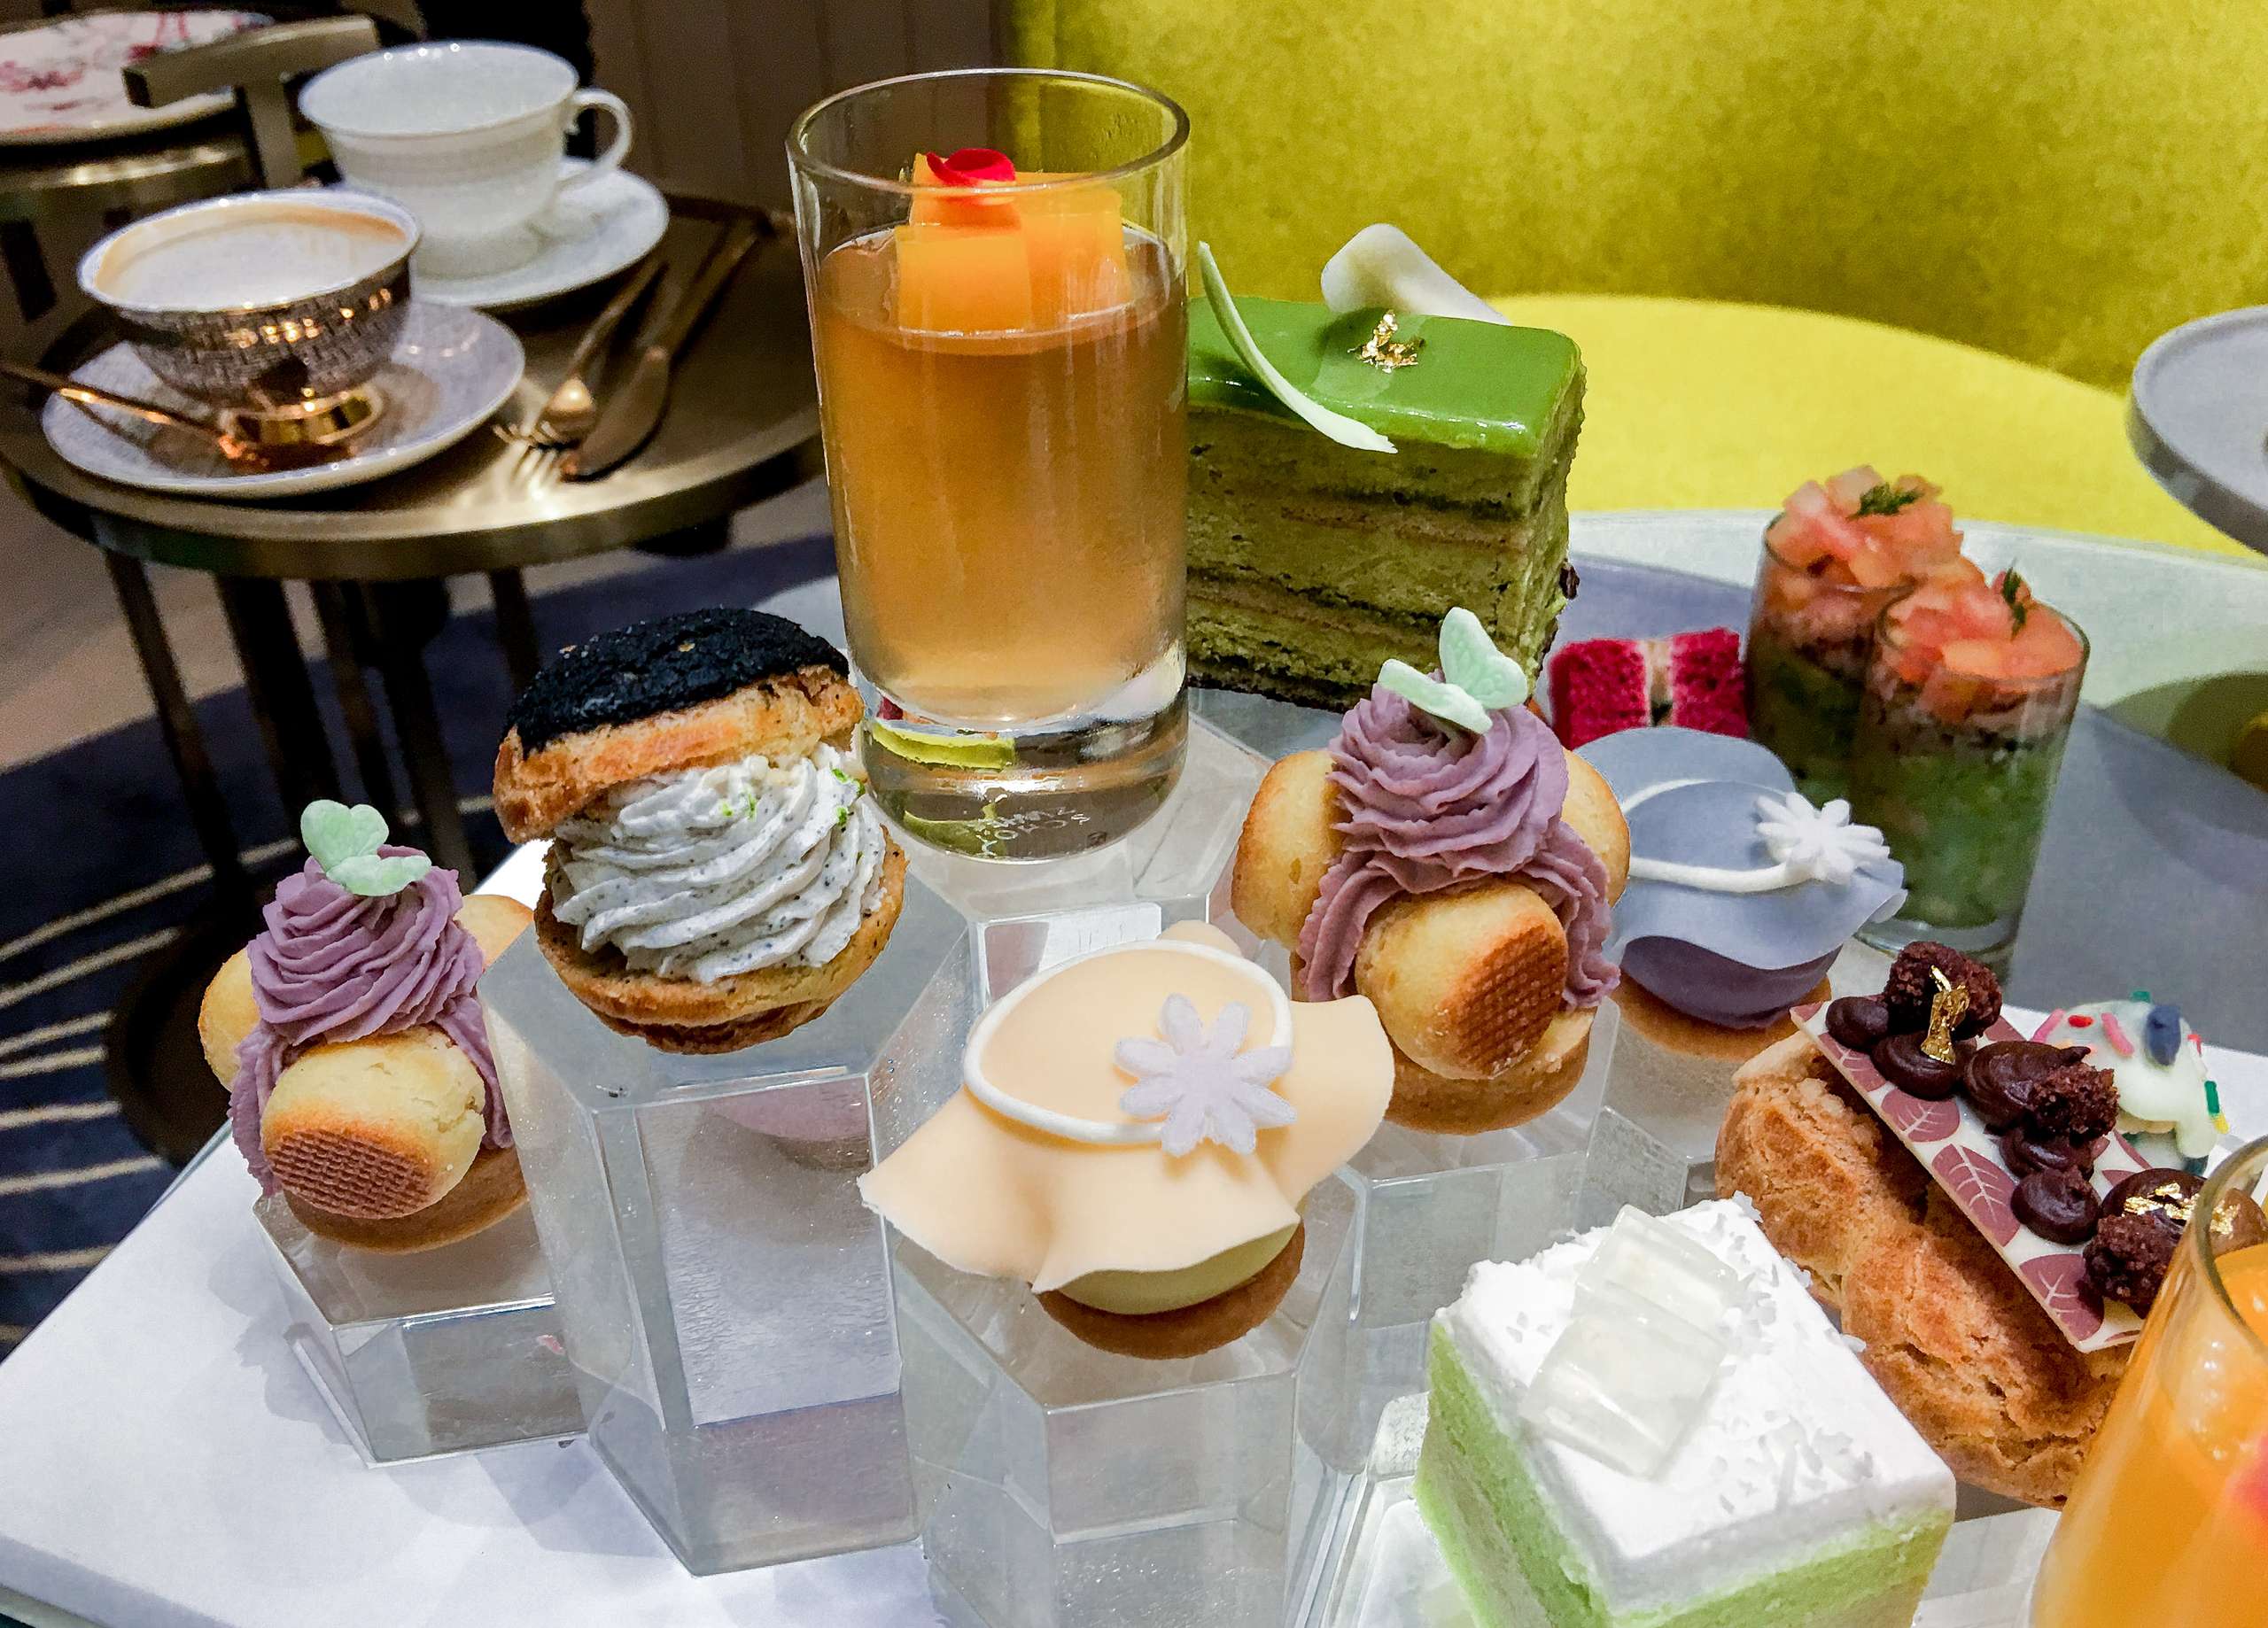 An assortment of sweets at Cha Bei's afternoon tea